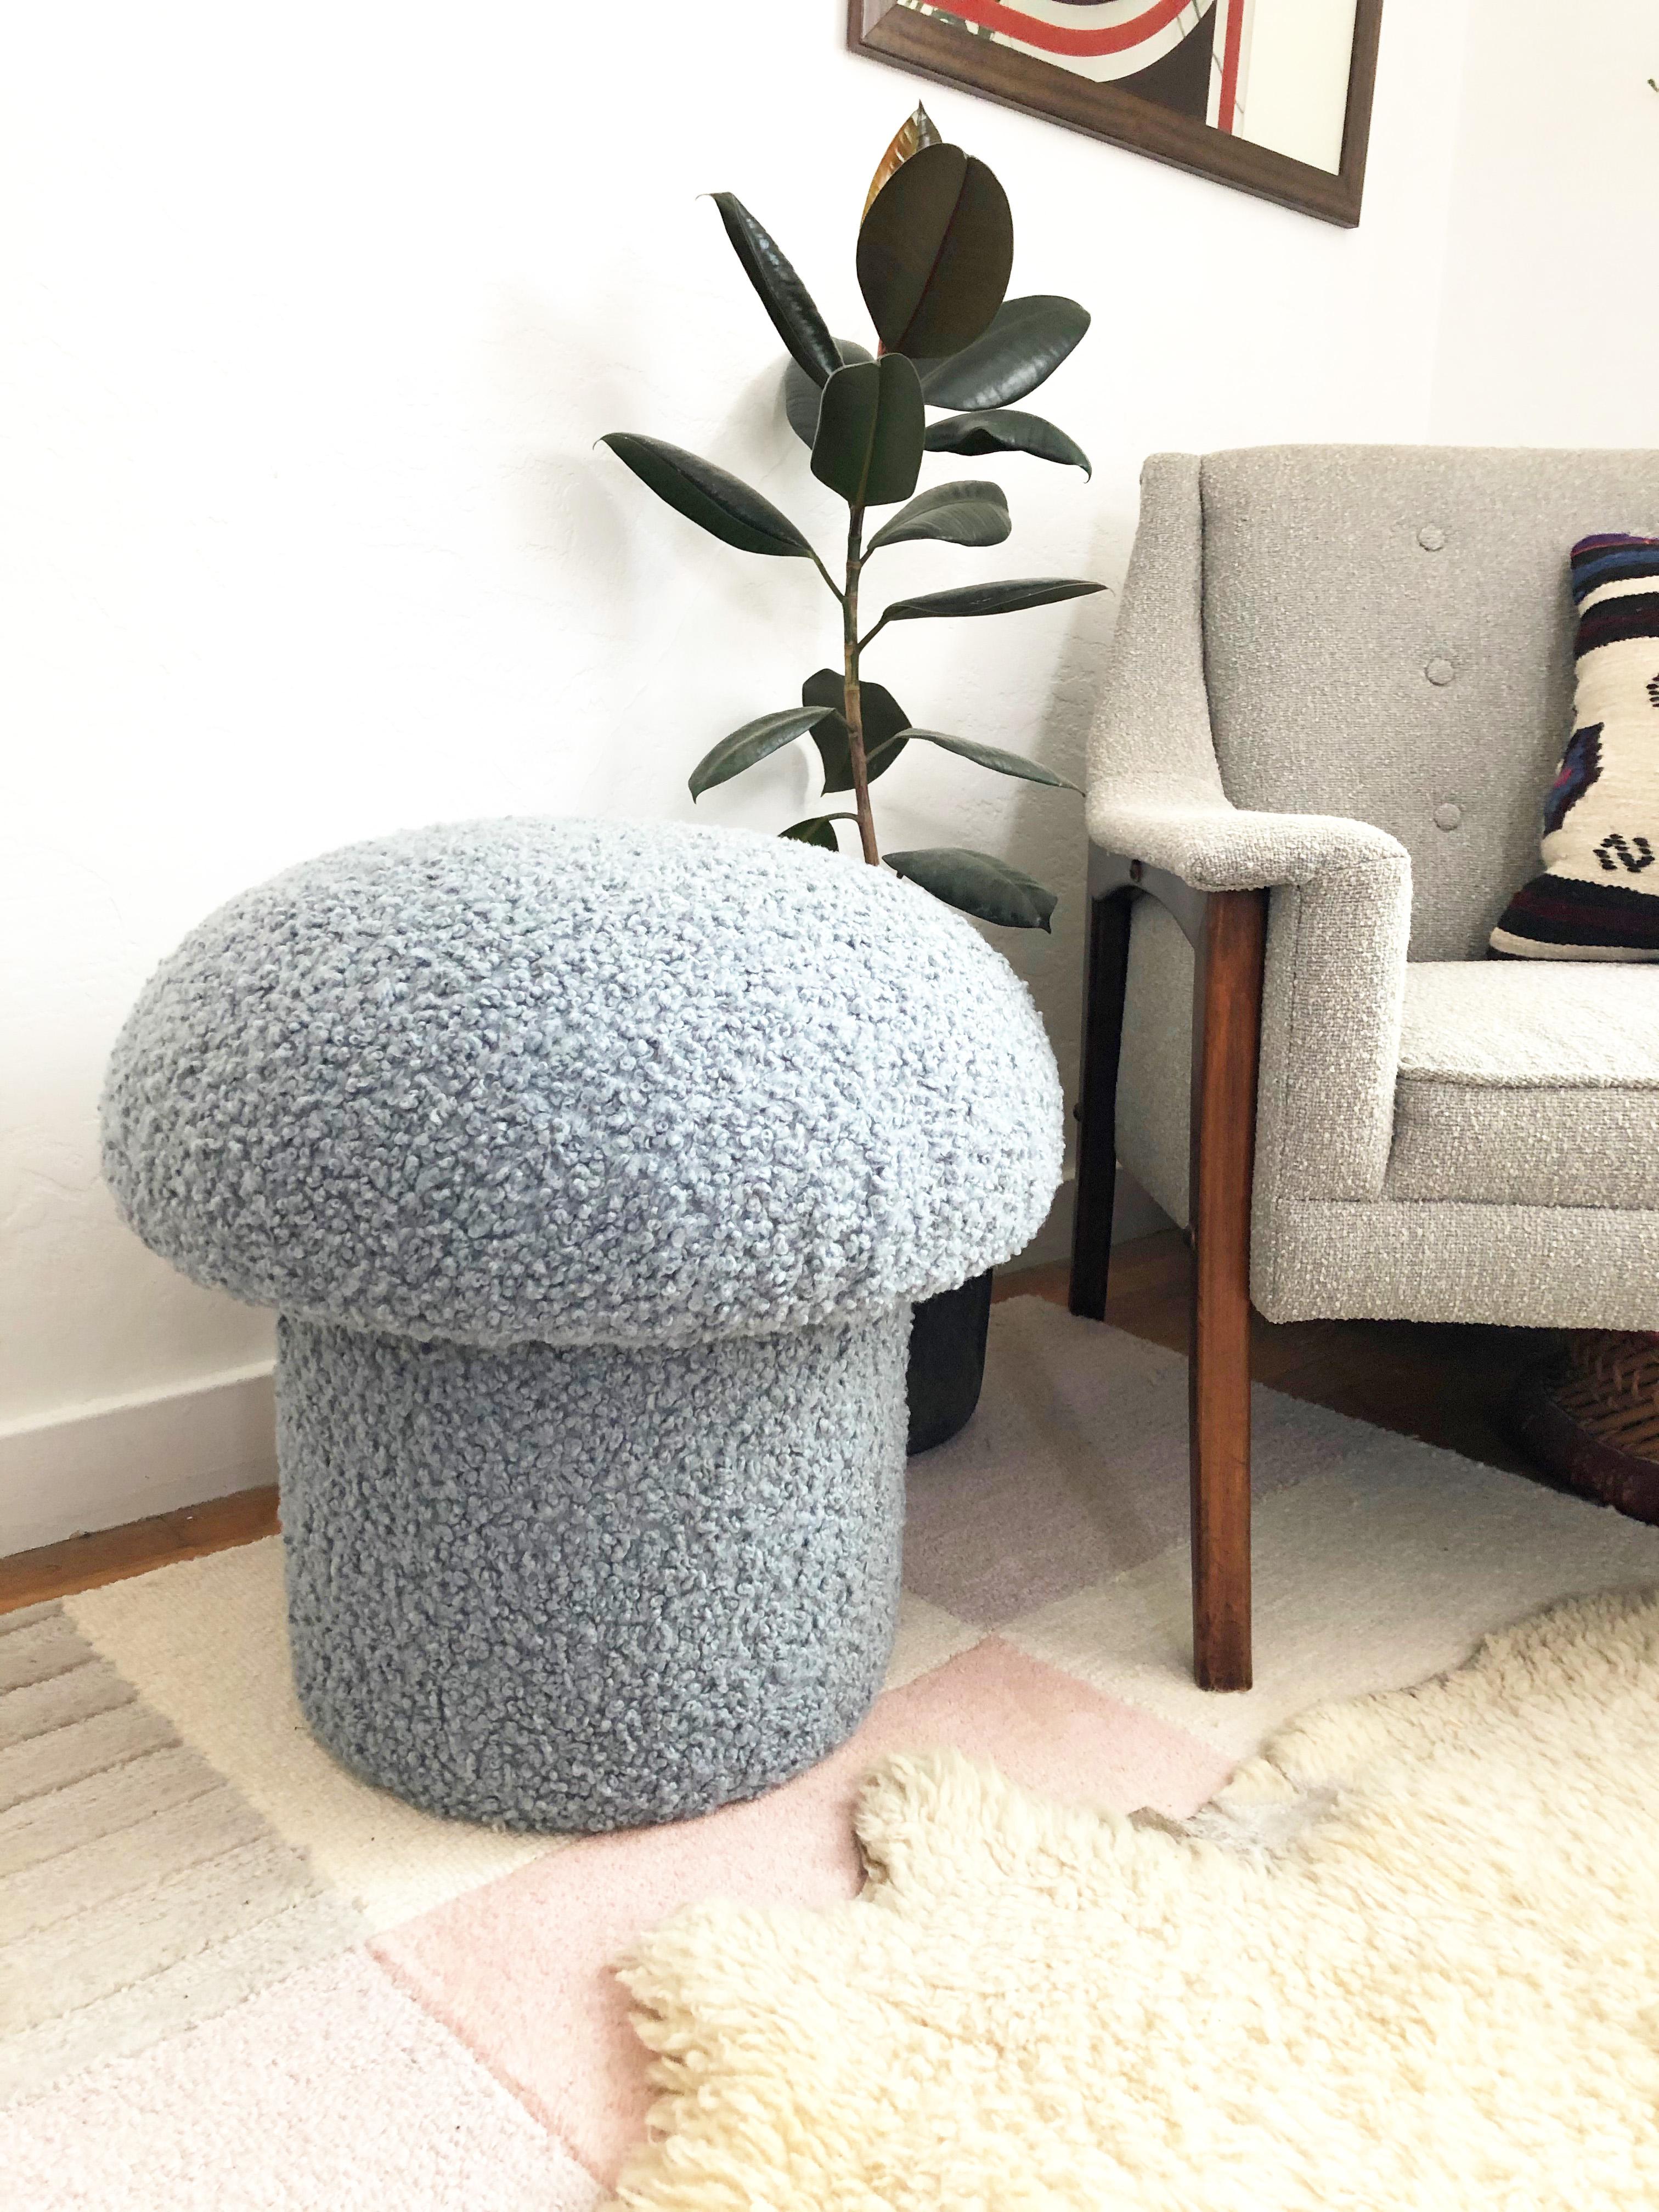 A handmade mushroom shaped ottoman, upholstered in a light blue colored curly boucle fabric. Perfect for using as a footstool or extra occasional seating. A comfortable cushioned seat and sculptural accent piece.